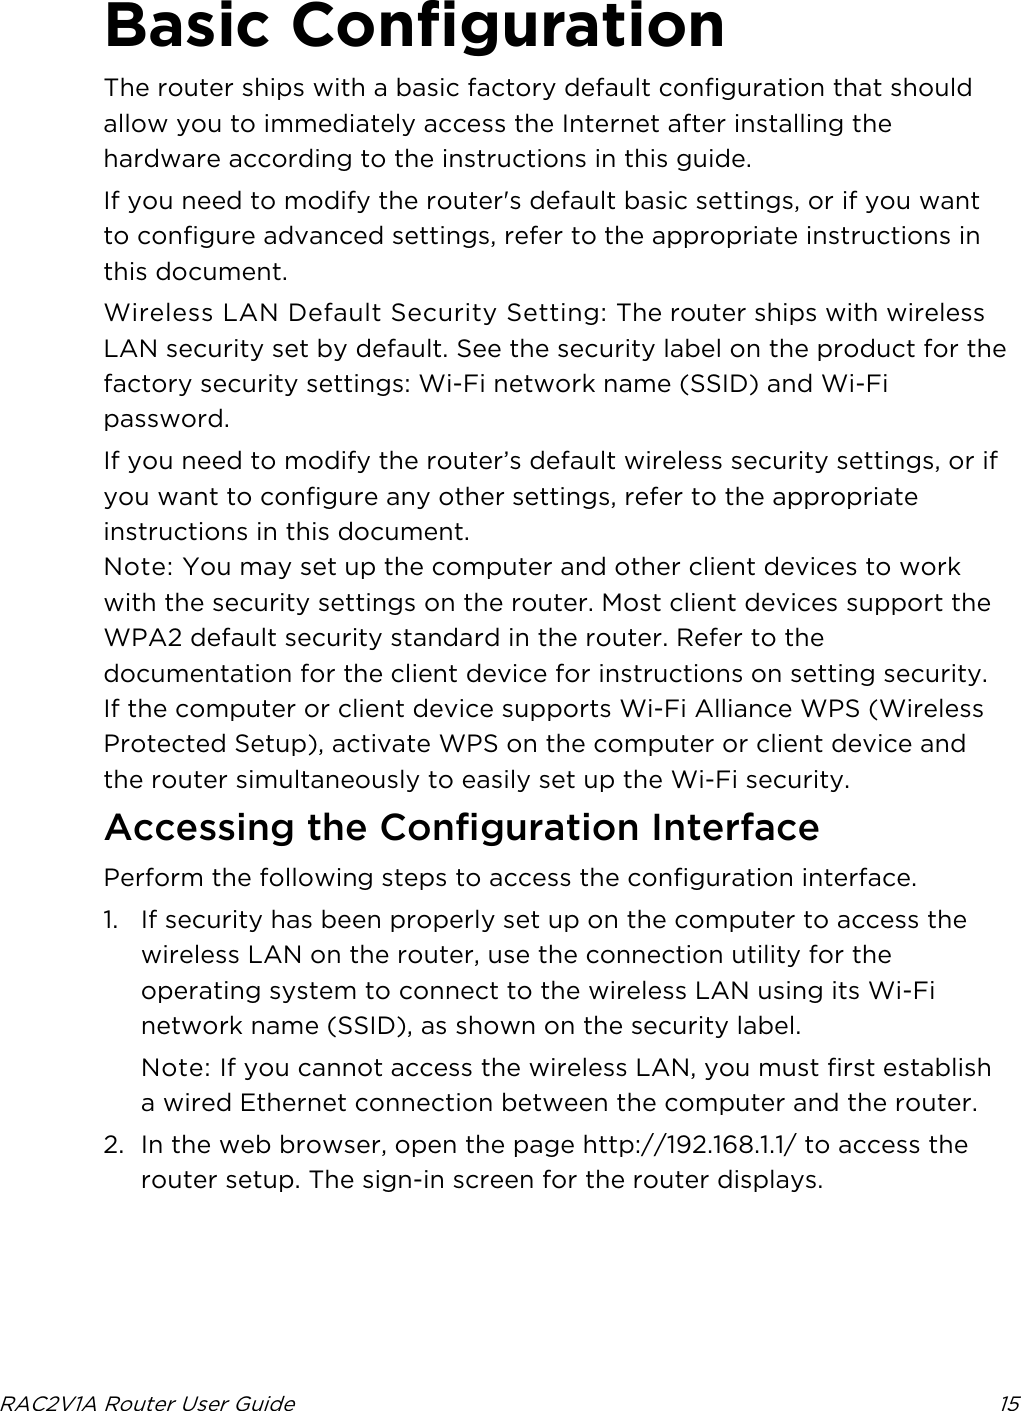  RAC2V1A Router User Guide 15  Basic Configuration The router ships with a basic factory default configuration that should allow you to immediately access the Internet after installing the hardware according to the instructions in this guide. If you need to modify the router&apos;s default basic settings, or if you want to configure advanced settings, refer to the appropriate instructions in this document. Wireless LAN Default Security Setting: The router ships with wireless LAN security set by default. See the security label on the product for the factory security settings: Wi-Fi network name (SSID) and Wi-Fi password. If you need to modify the router’s default wireless security settings, or if you want to configure any other settings, refer to the appropriate instructions in this document. Note: You may set up the computer and other client devices to work with the security settings on the router. Most client devices support the WPA2 default security standard in the router. Refer to the documentation for the client device for instructions on setting security. If the computer or client device supports Wi-Fi Alliance WPS (Wireless Protected Setup), activate WPS on the computer or client device and the router simultaneously to easily set up the Wi-Fi security.   Accessing the Configuration Interface Perform the following steps to access the configuration interface. 1. If security has been properly set up on the computer to access the wireless LAN on the router, use the connection utility for the operating system to connect to the wireless LAN using its Wi-Fi network name (SSID), as shown on the security label. Note: If you cannot access the wireless LAN, you must first establish a wired Ethernet connection between the computer and the router. 2. In the web browser, open the page http://192.168.1.1/ to access the router setup. The sign-in screen for the router displays. 